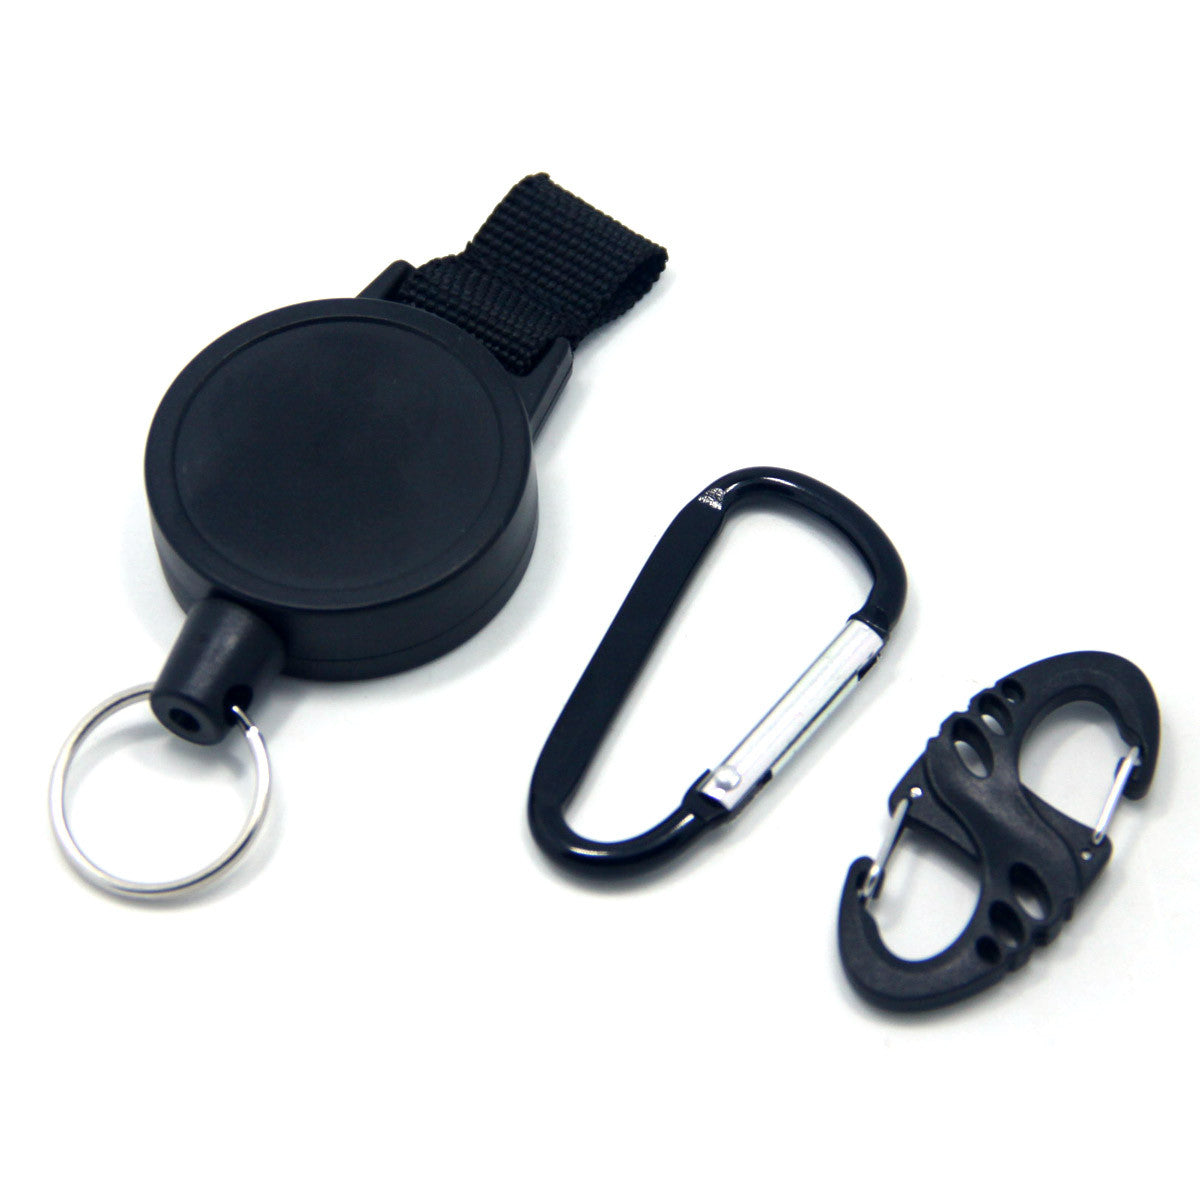 Heavy Duty Fly FIshing Zinger Securit Retractable Reel w/ Polycarbonate  Case 24 inch Steel Cable